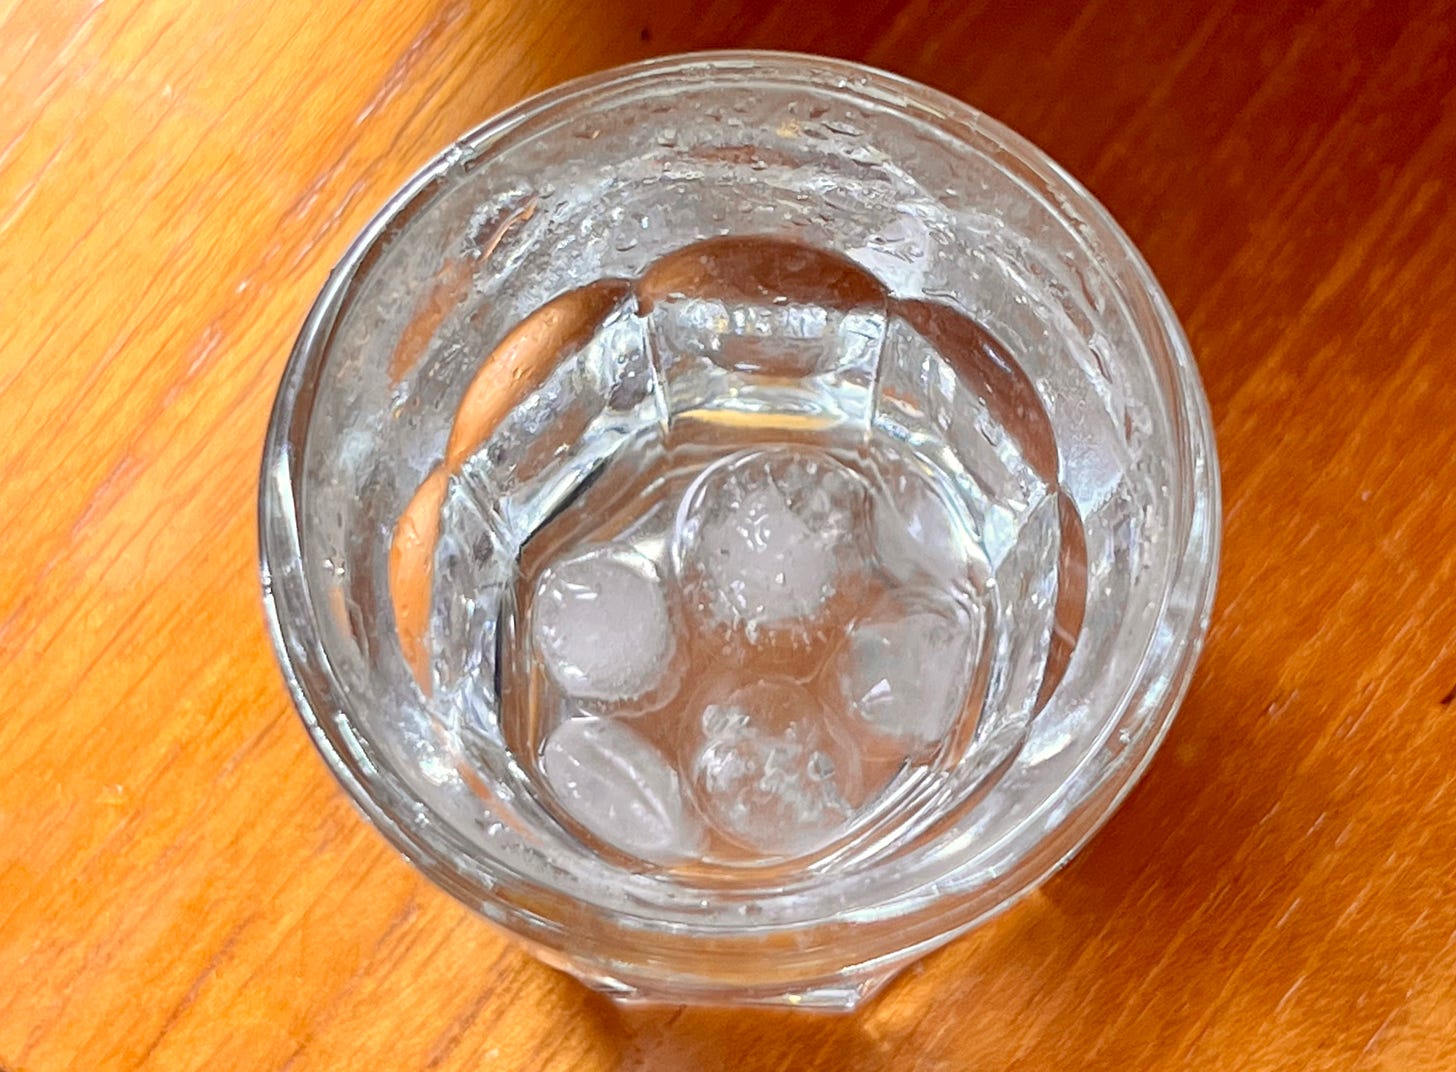 An overhead image of a shot glass with the reminanse of some sluice in the bottom